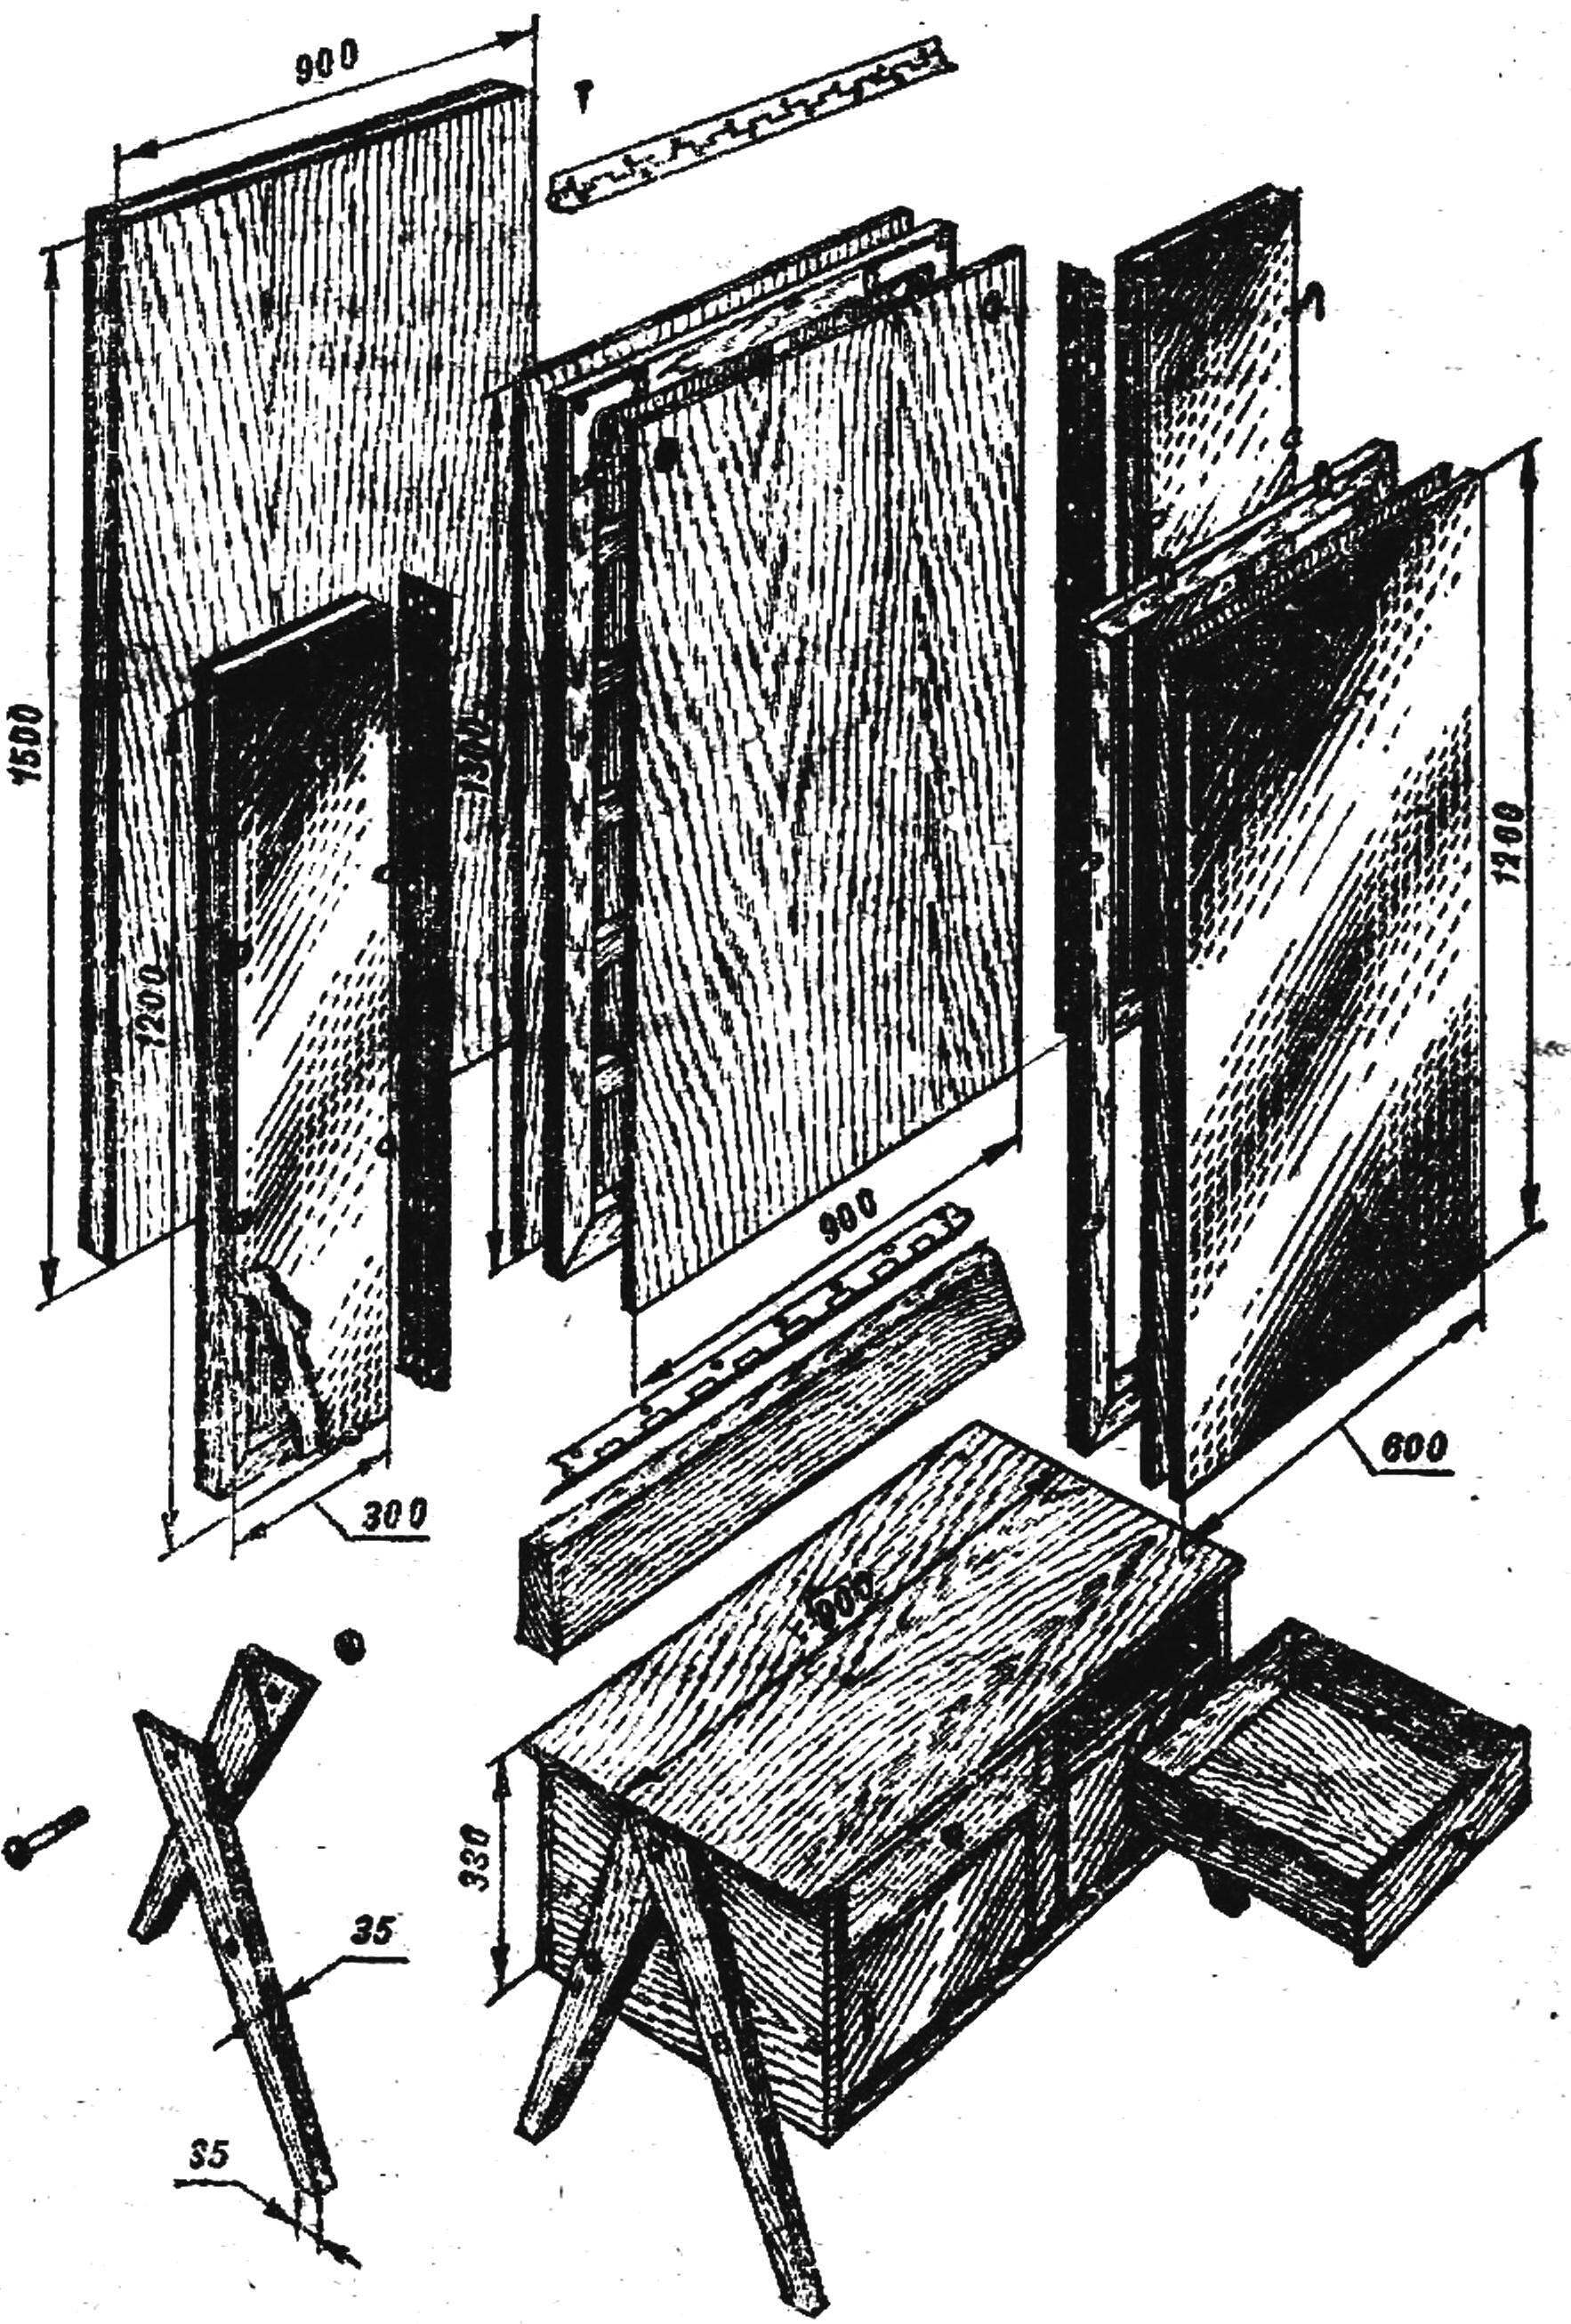 Fig. 1. The main structural elements of the trellis table.